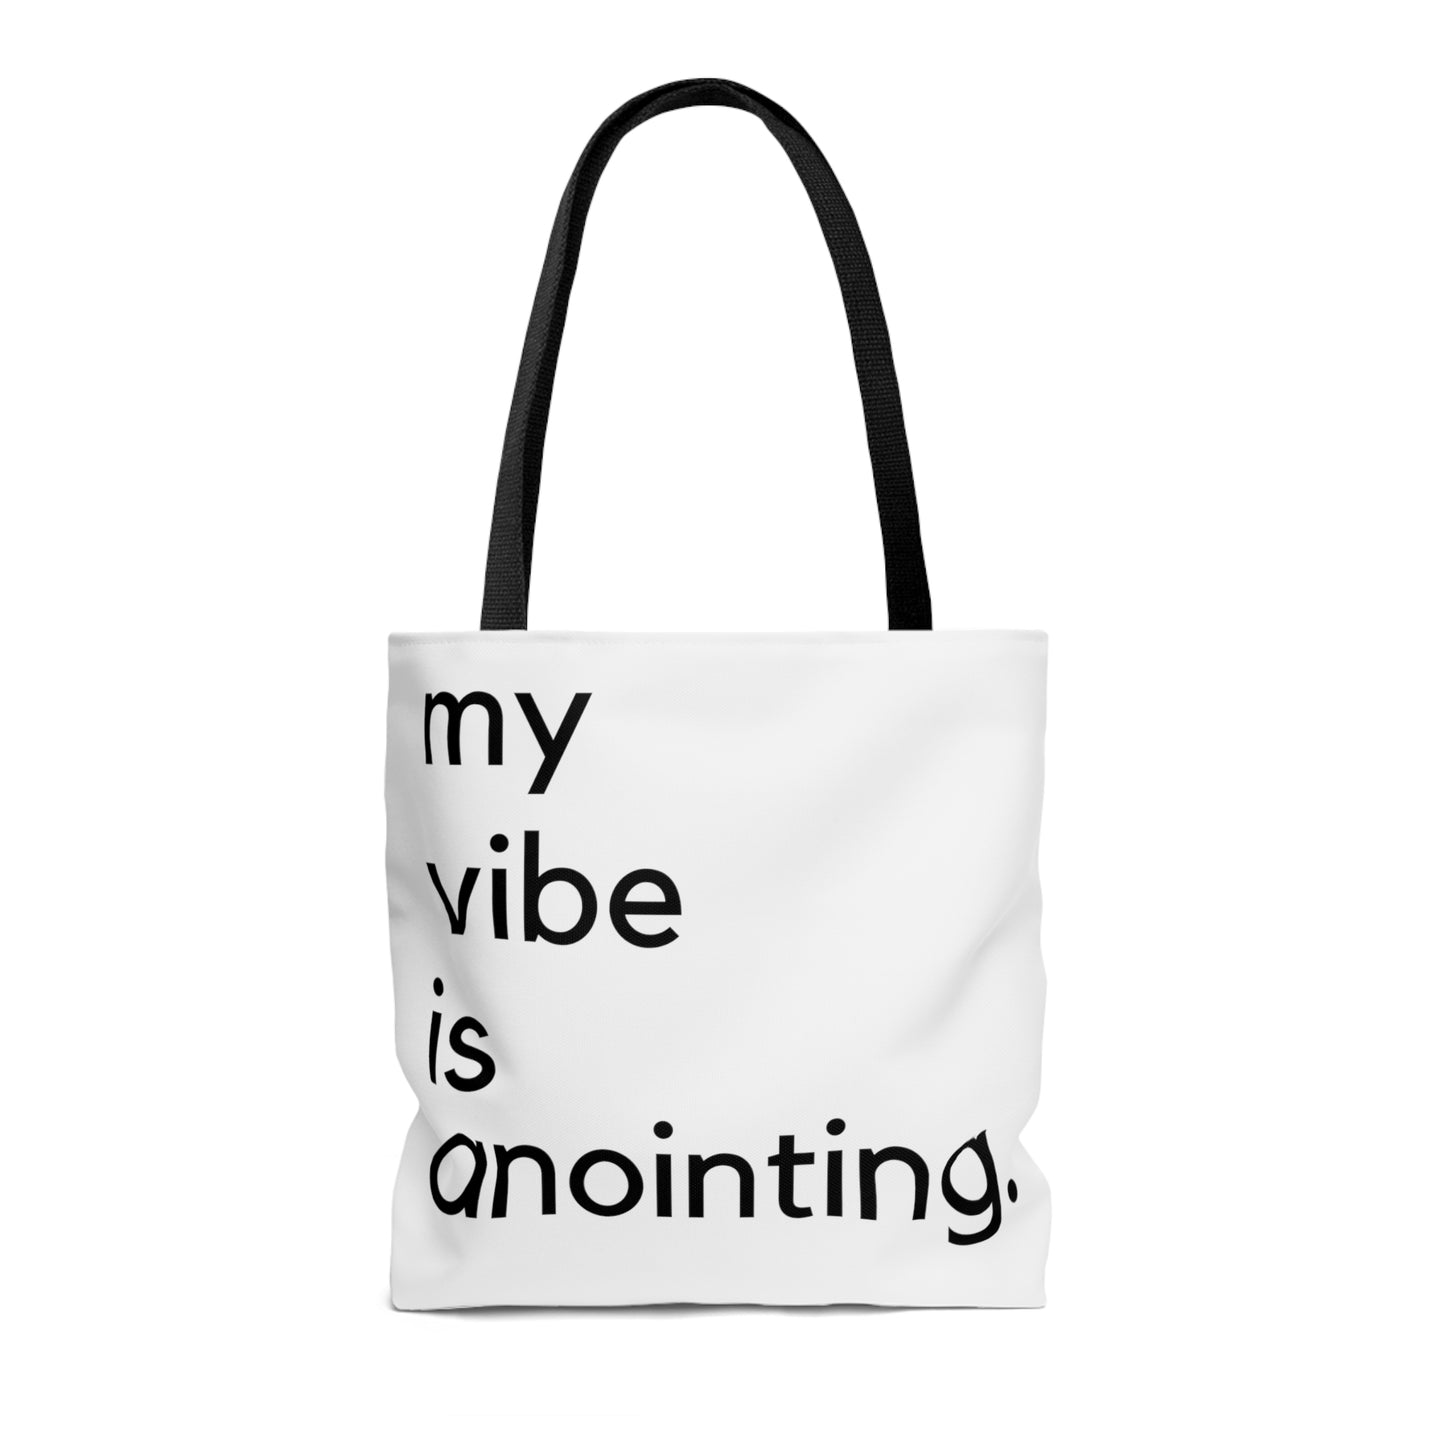 My Vibe is Anointing Tote Bag